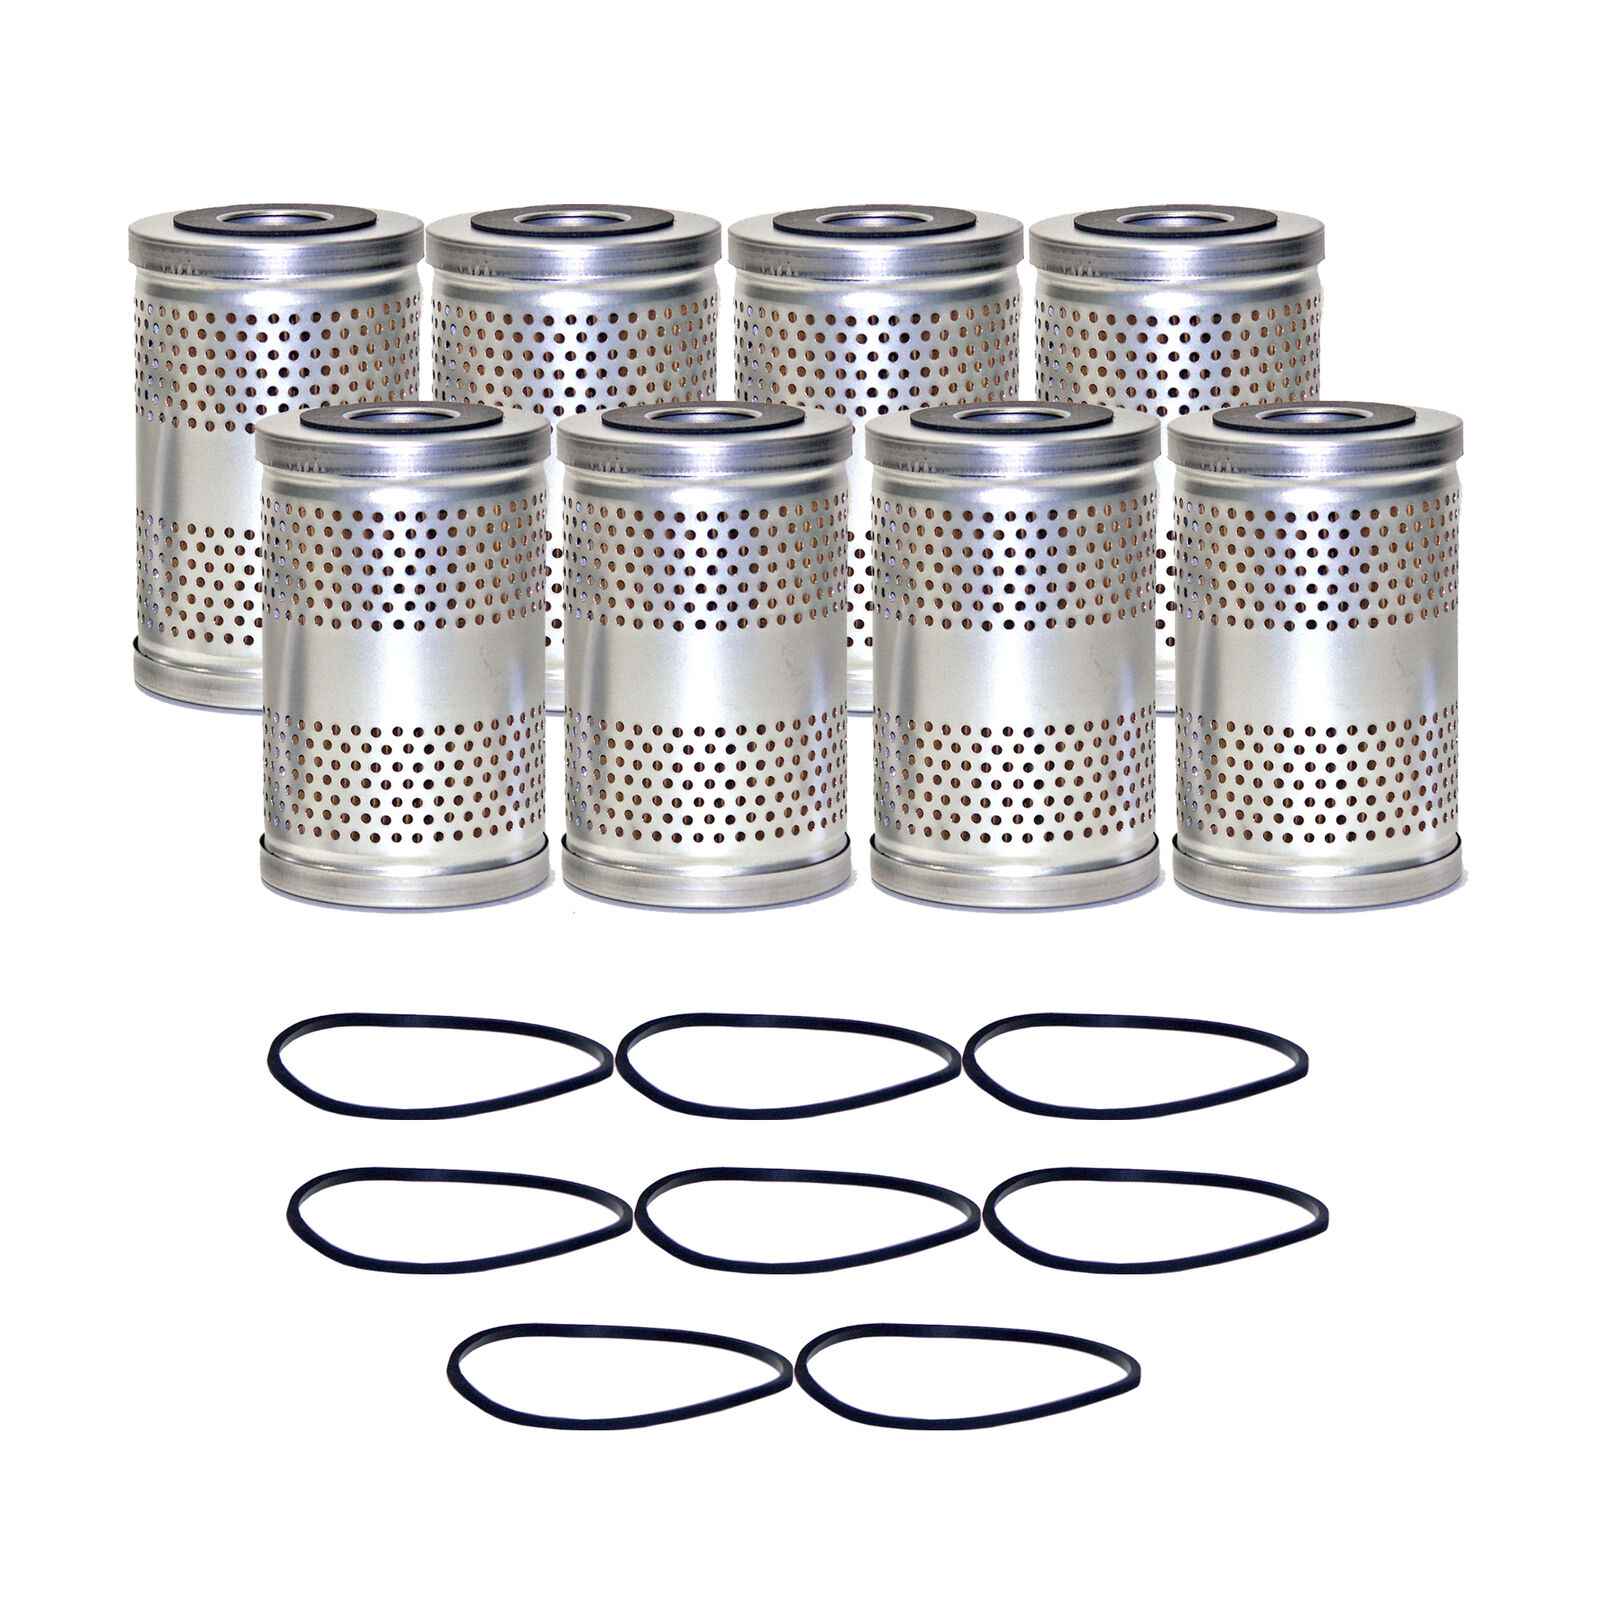 Wix Set of 8 Engine Motor Oil Filters For Chevrolet GMC Iso Studebaker StdAsp